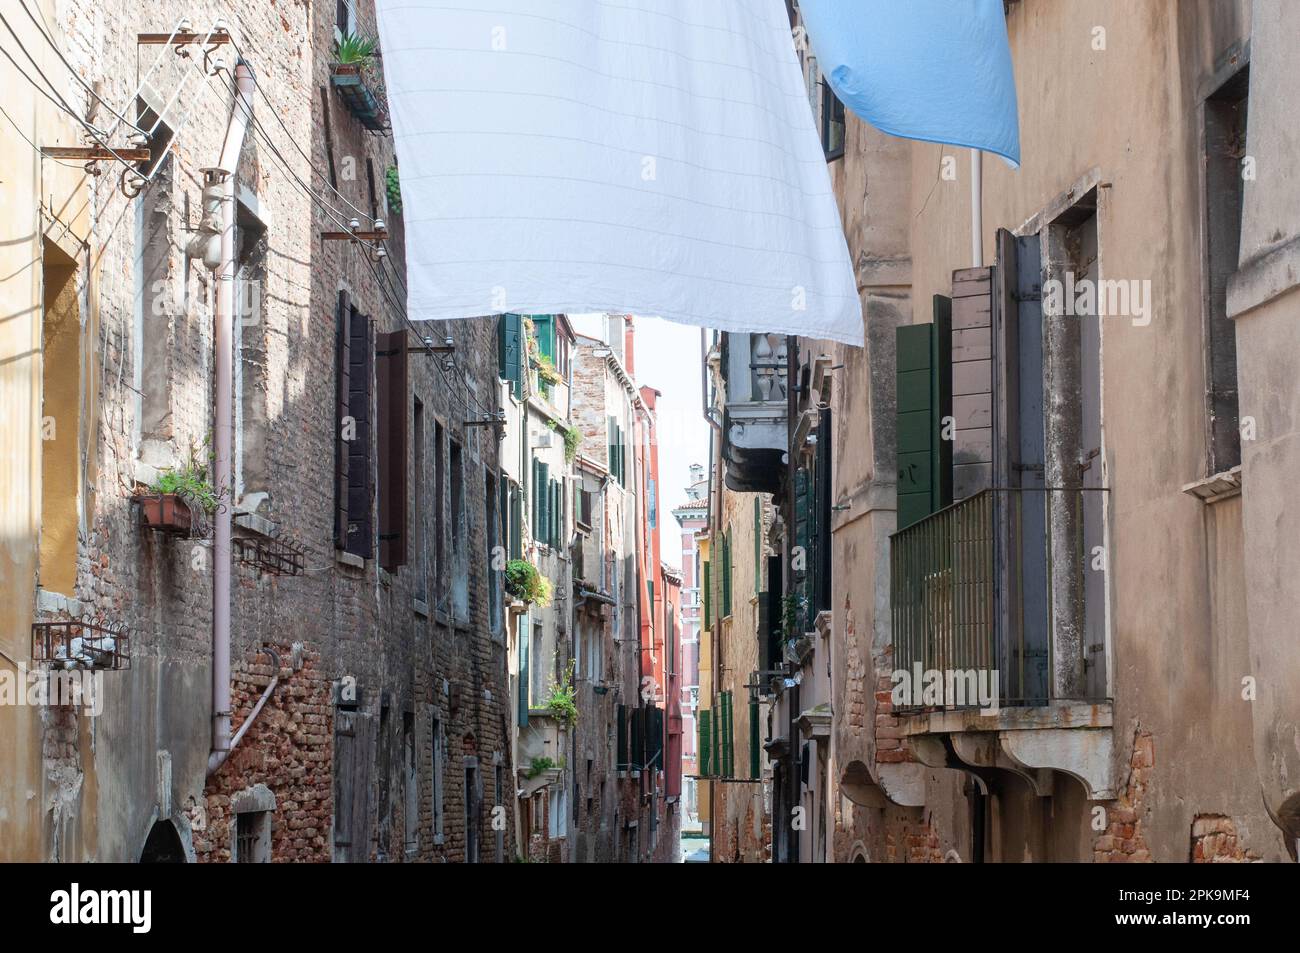 Narrow canal and architectural exteriors, Venice, Italy Stock Photo